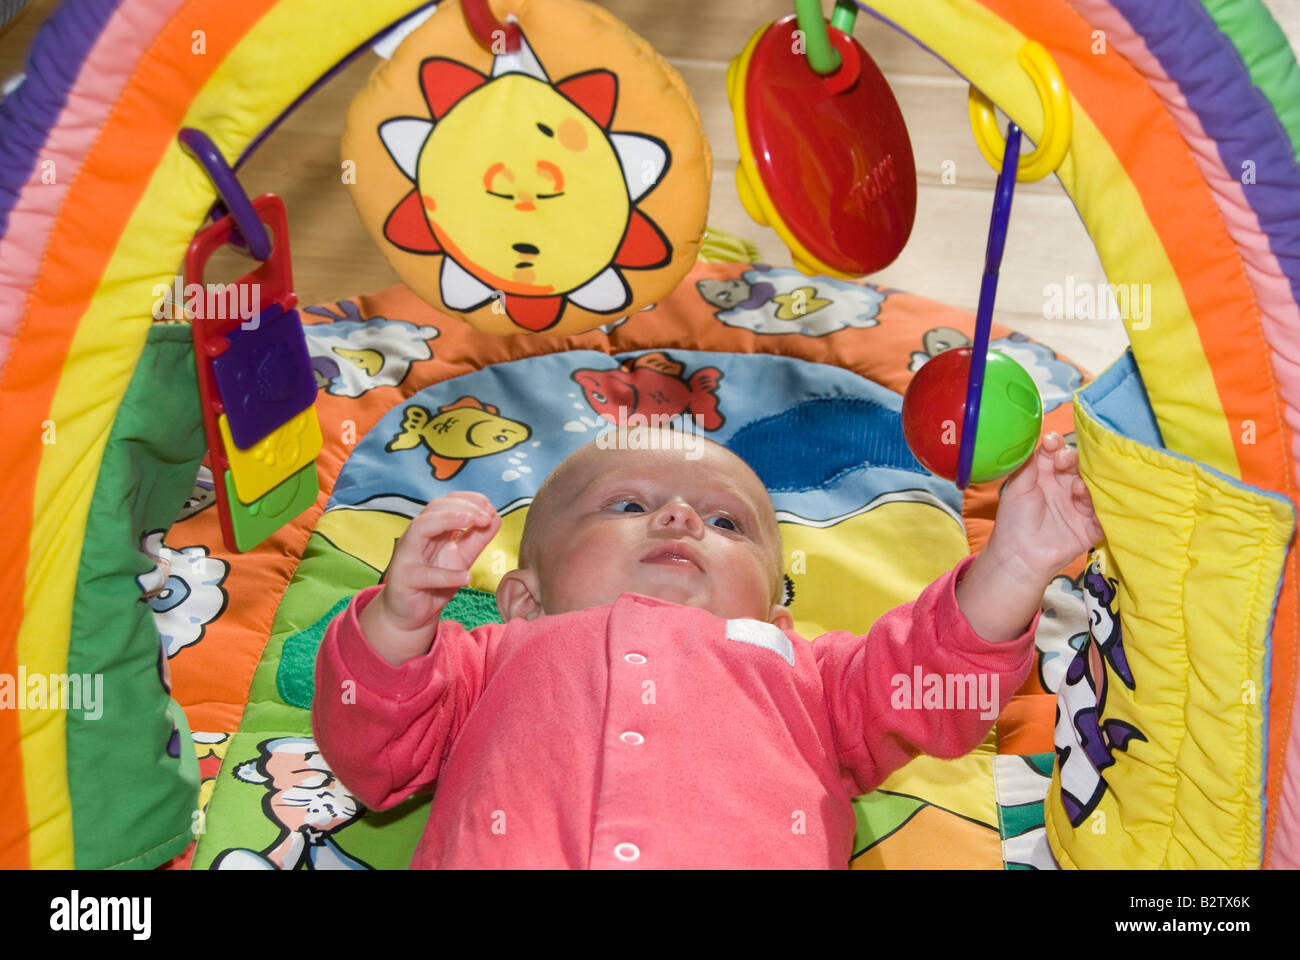 Baby Boy Joshua Kailas Hudson Aged 15 Weeks Playing at Shaking the Hanging Rattle of his Colourful Toy Baby Gym Stock Photo